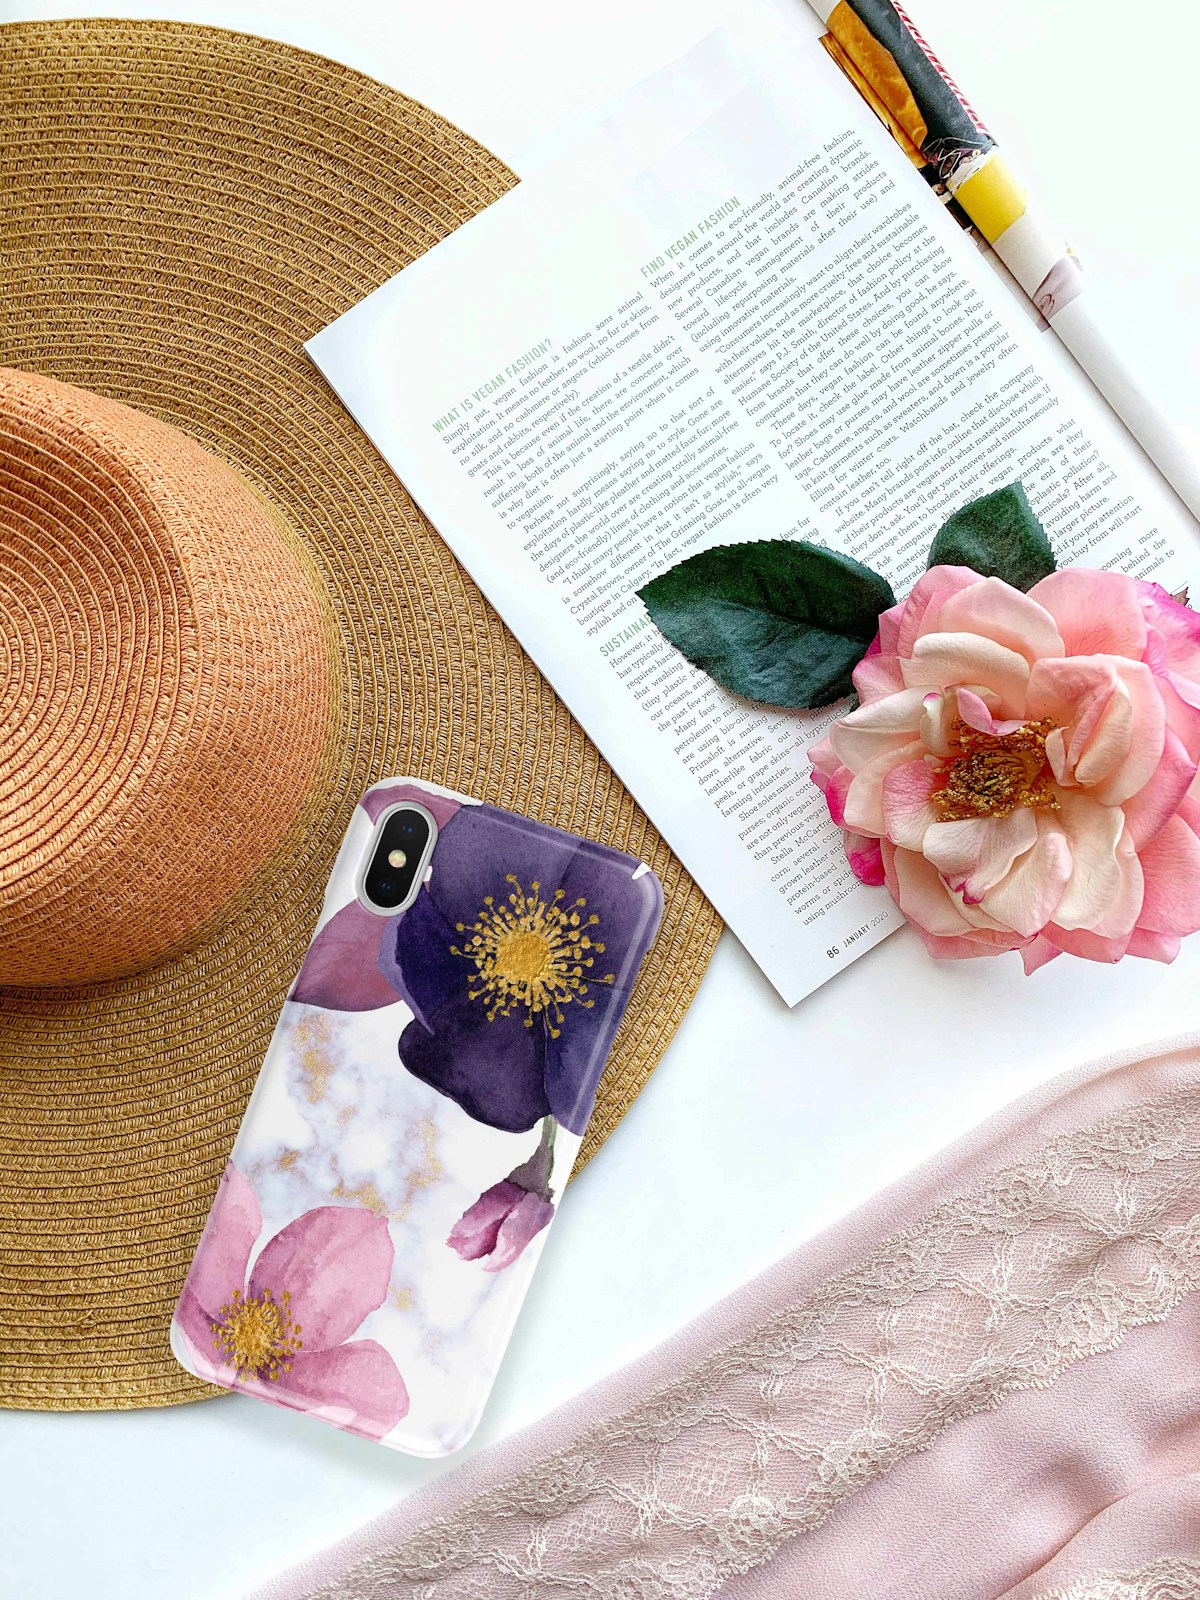 Starting Your Phone Case Business Journey - Designing and Customizing Phone Cases